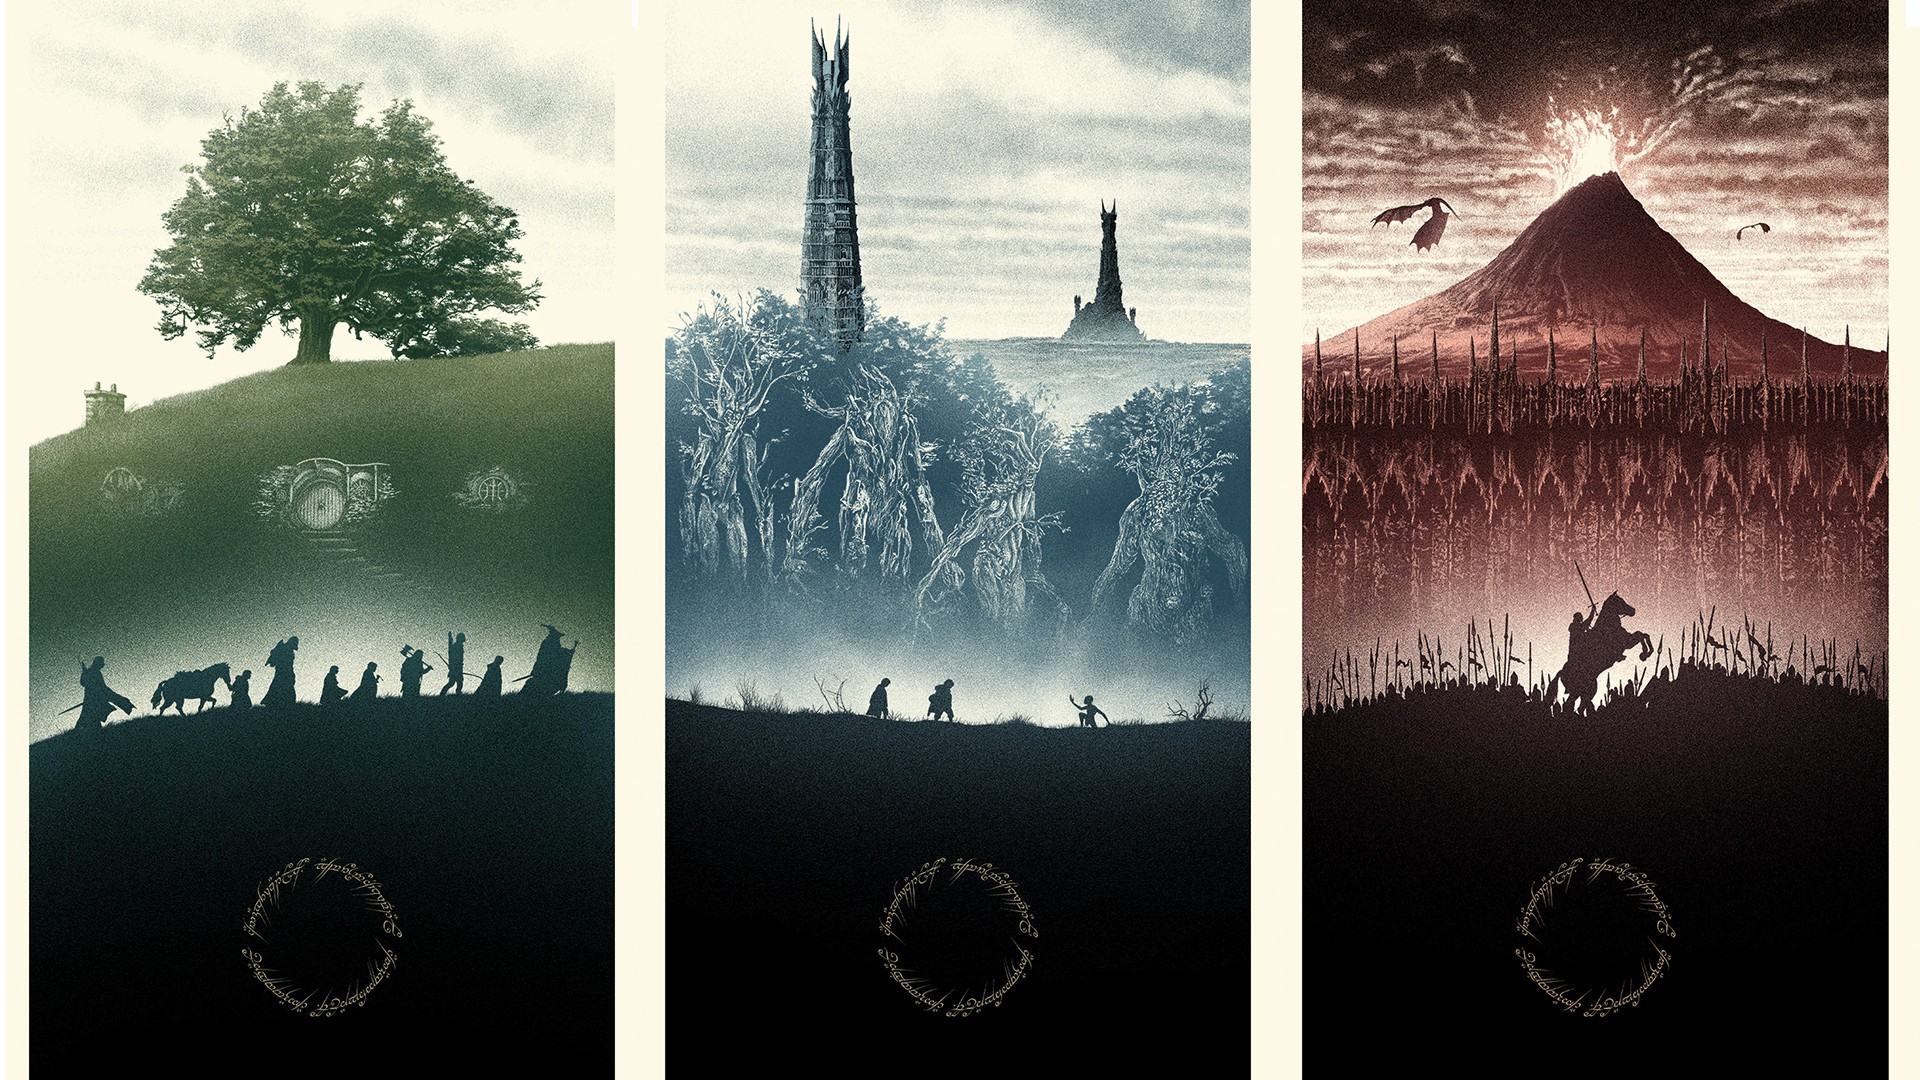 The Lord Of The Rings The Shire Bag End Mordor Collage Isengard Orthanc 1920x1080